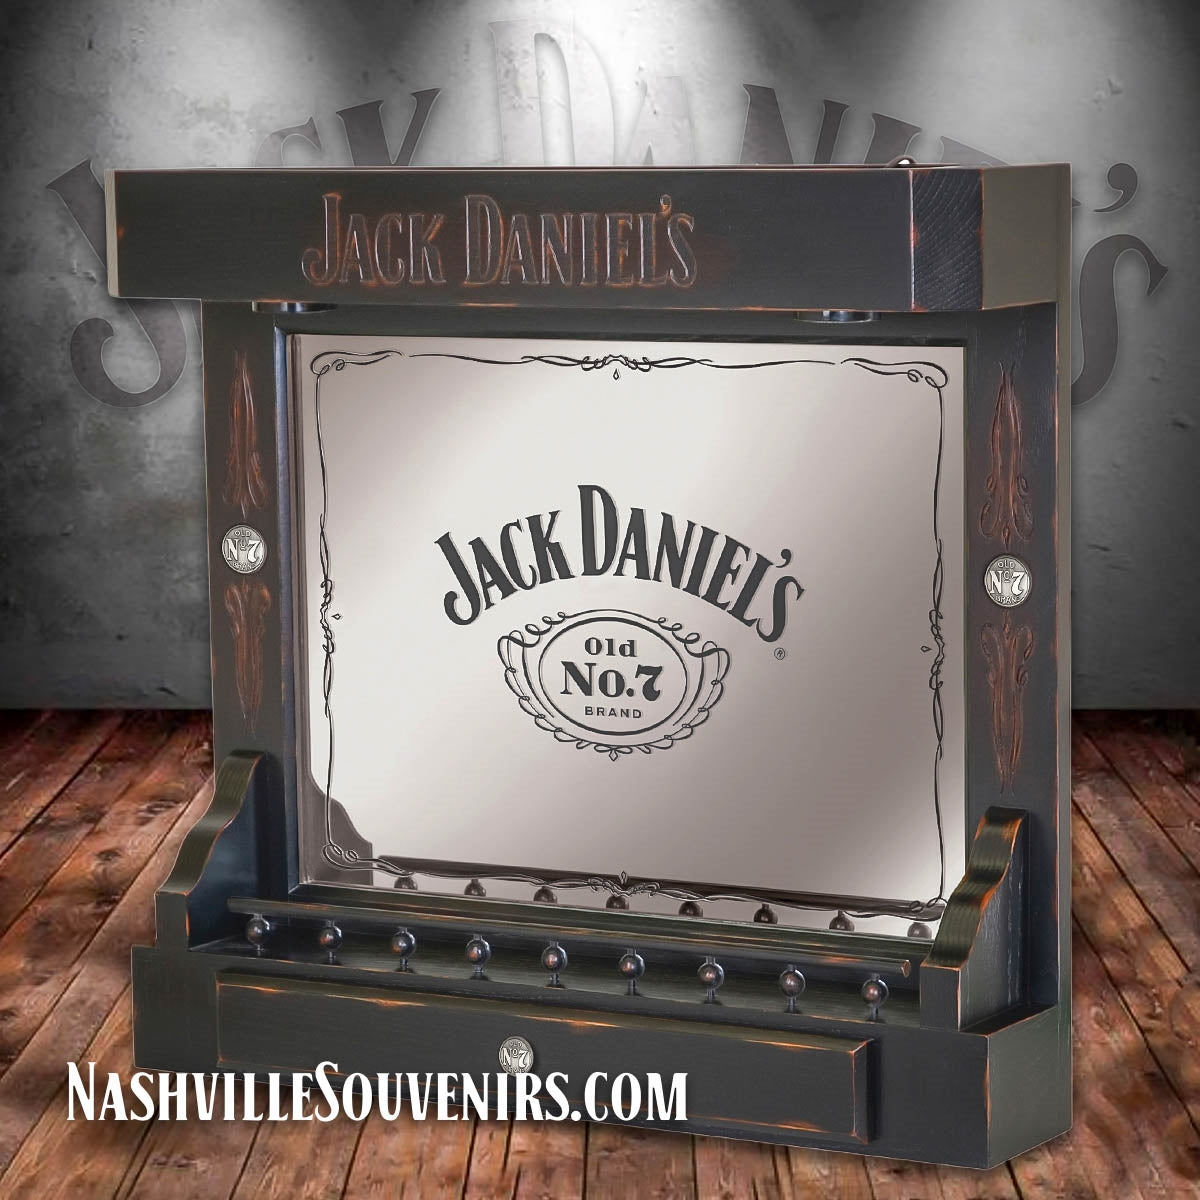 Here's another great addition for your Jack Daniel's man cave. This Jack Daniel's back bar is made from selected hardwoods and hand rubbed in the Tennessee charcoal finish.